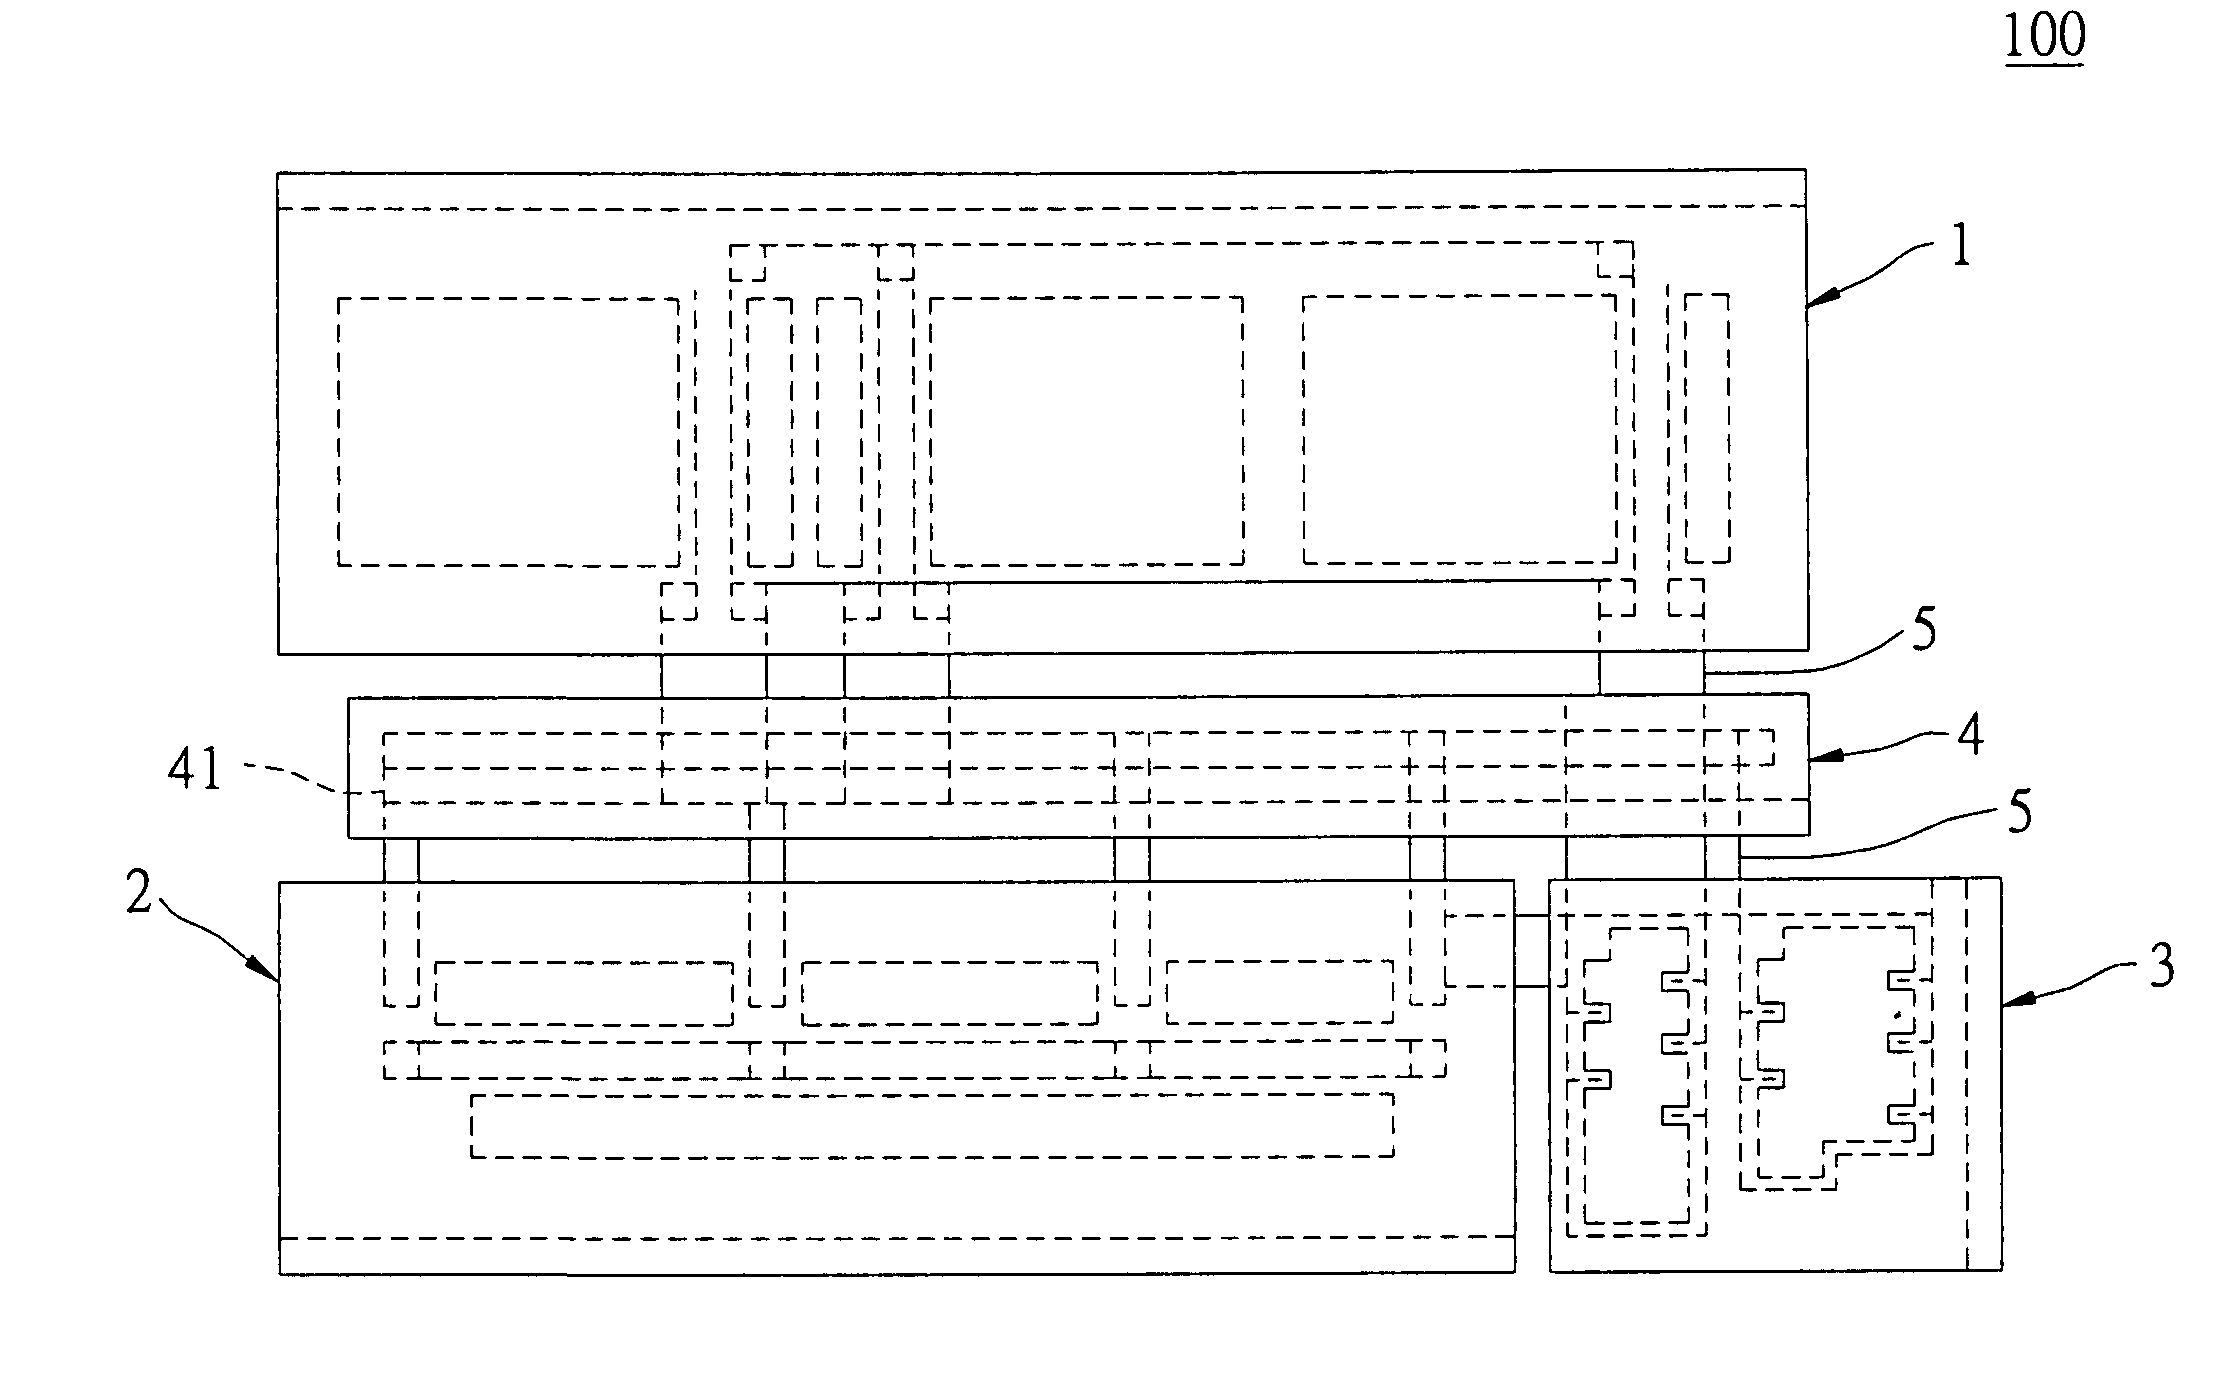 Process-oriented modulized plant for TFT-LCD fabrication